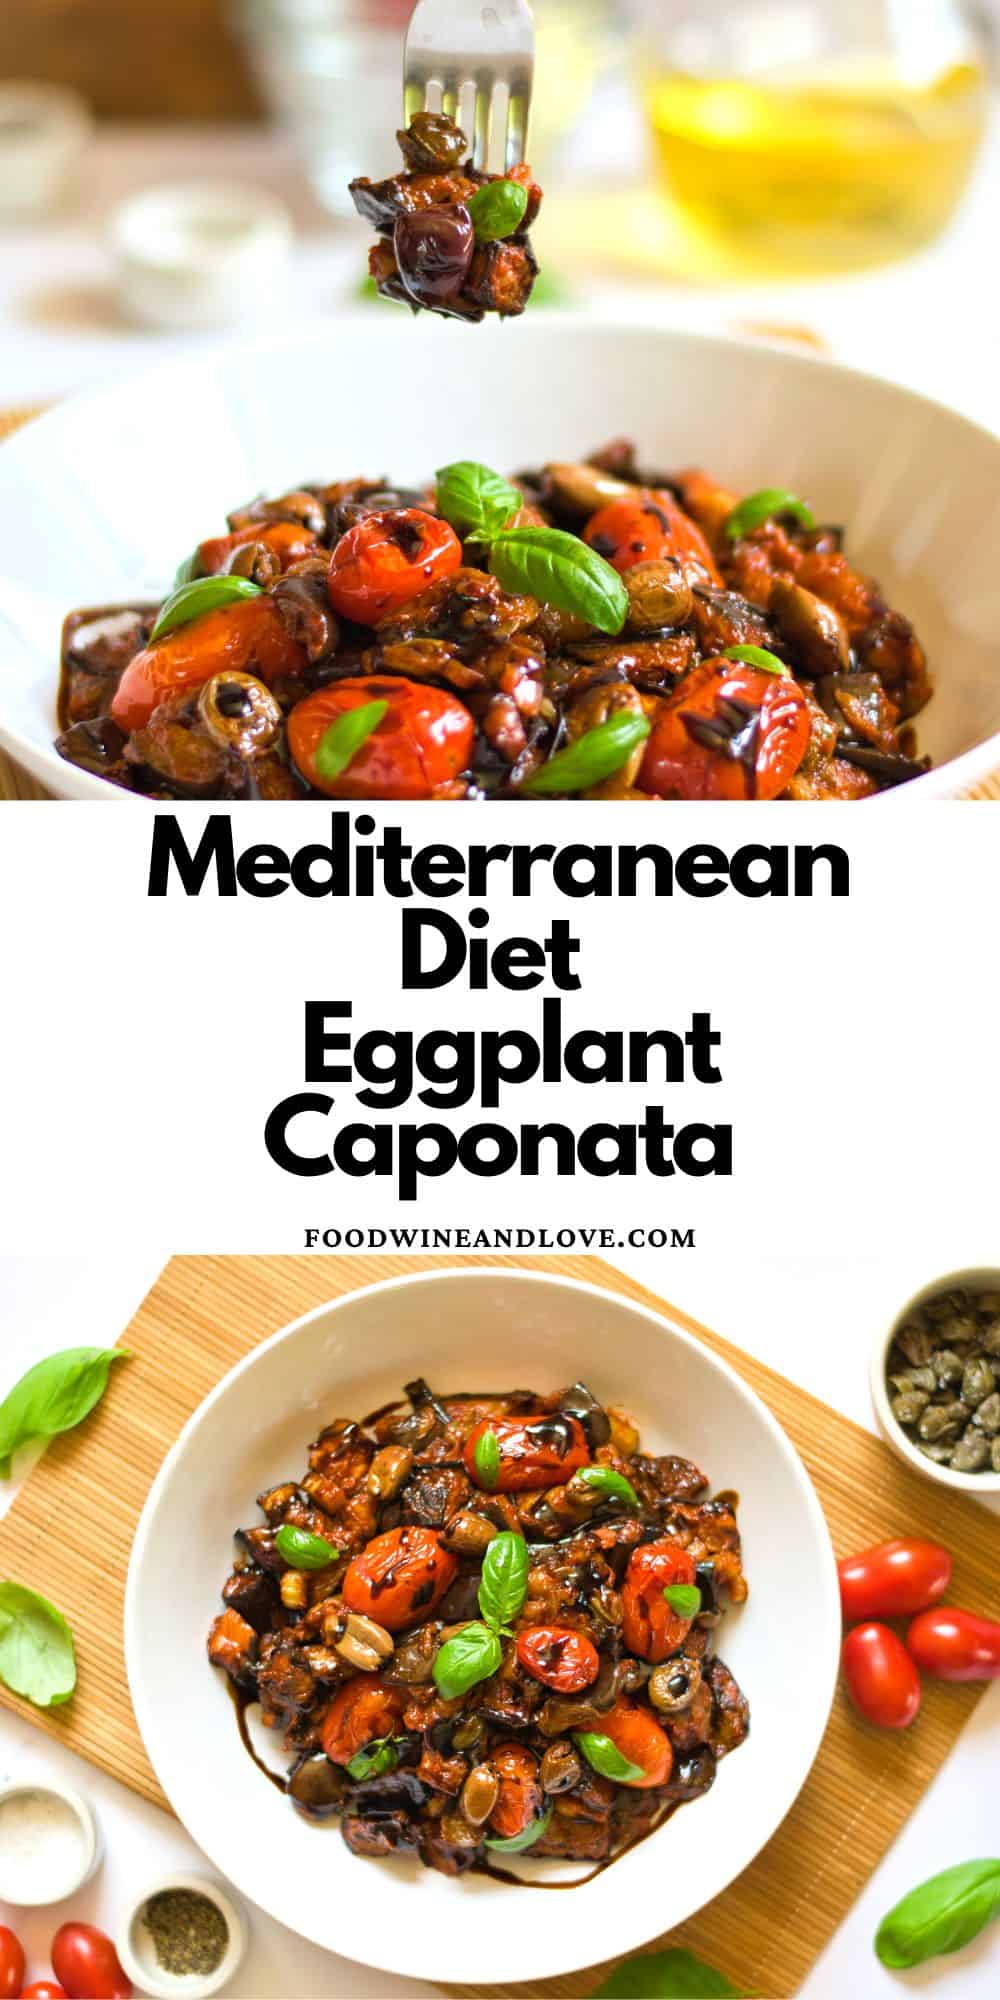 Mediterranean Diet Eggplant Caponata, a delicious and classic Italian one skillet dinner recipe made with fresh vegetables.